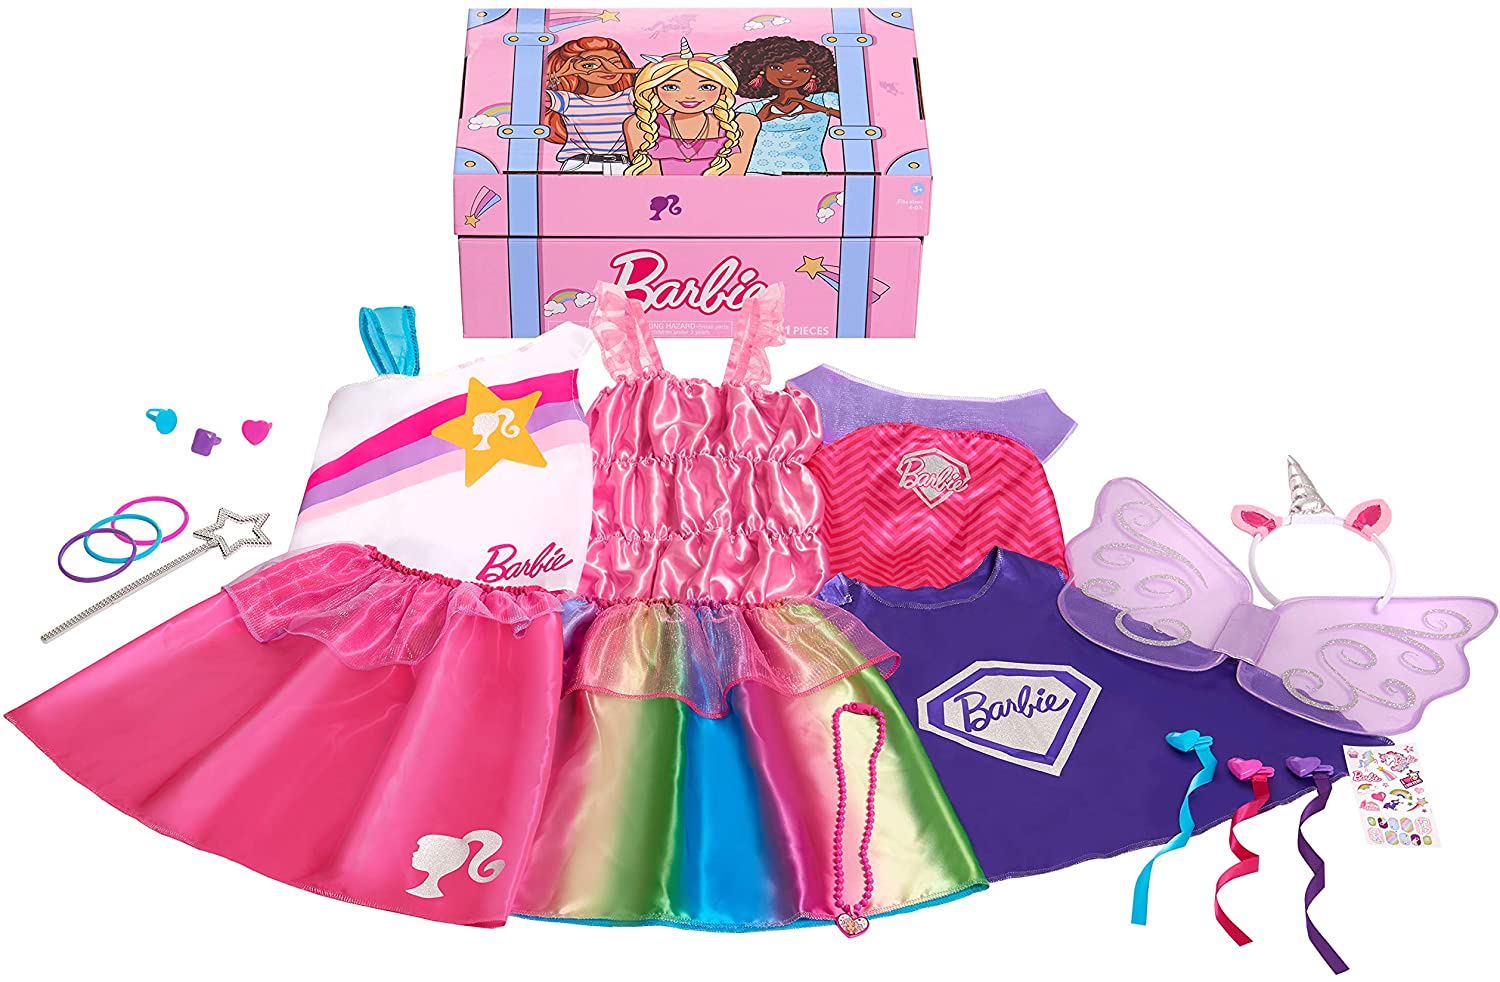 Barbie Fashionista Girls’ Dress Up Clothes Chest